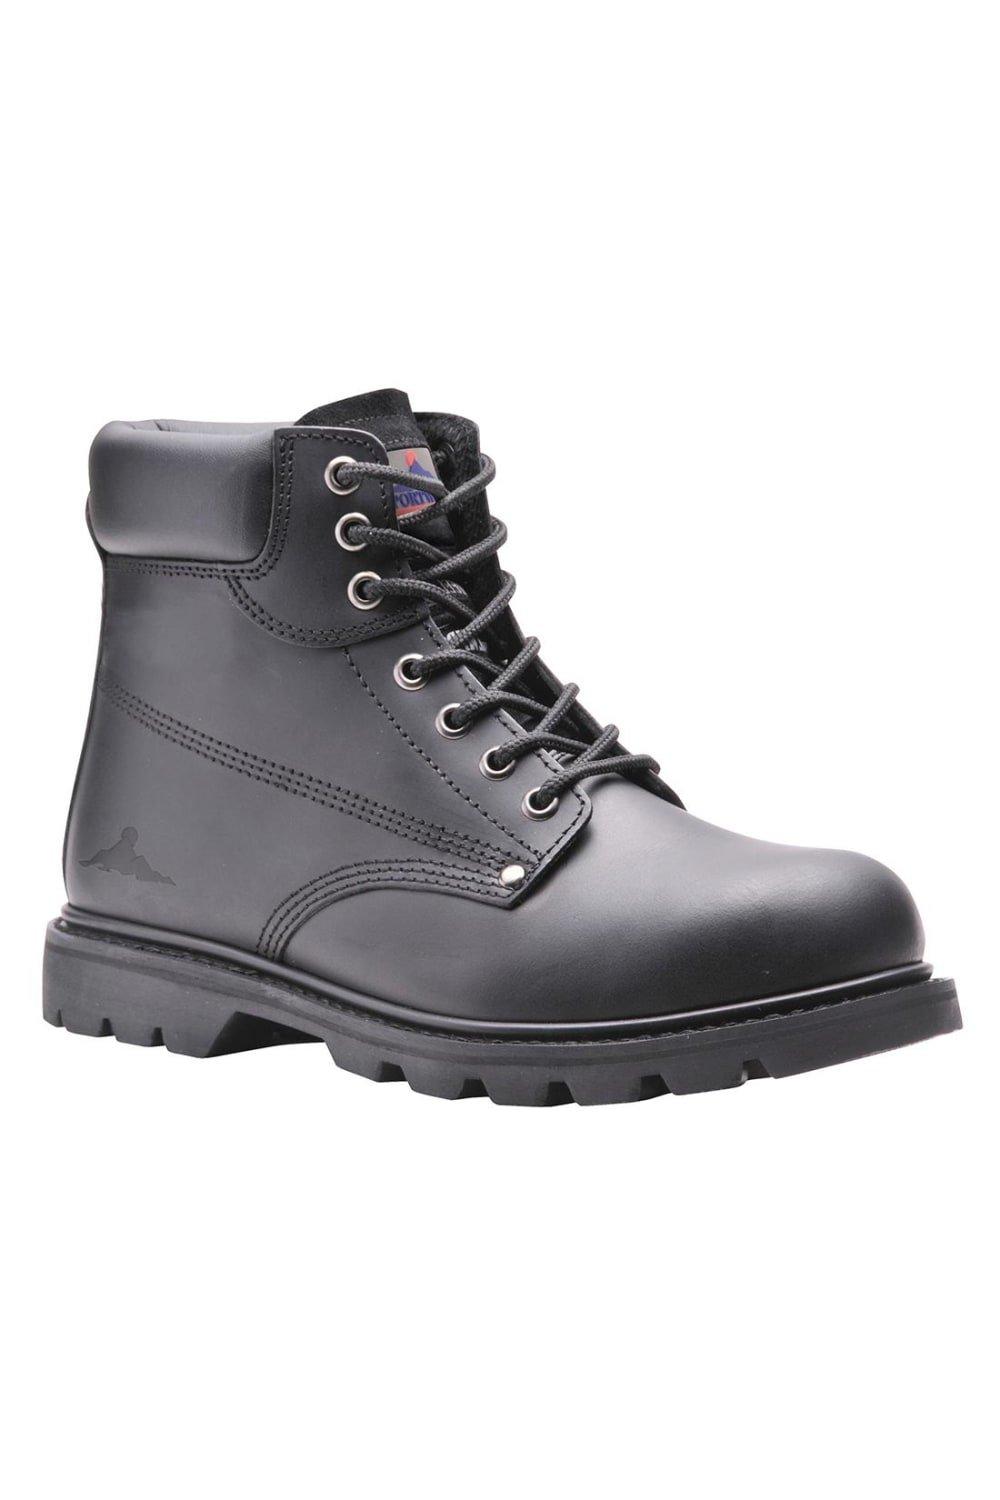 Steelite Leather Welted Safety Boots